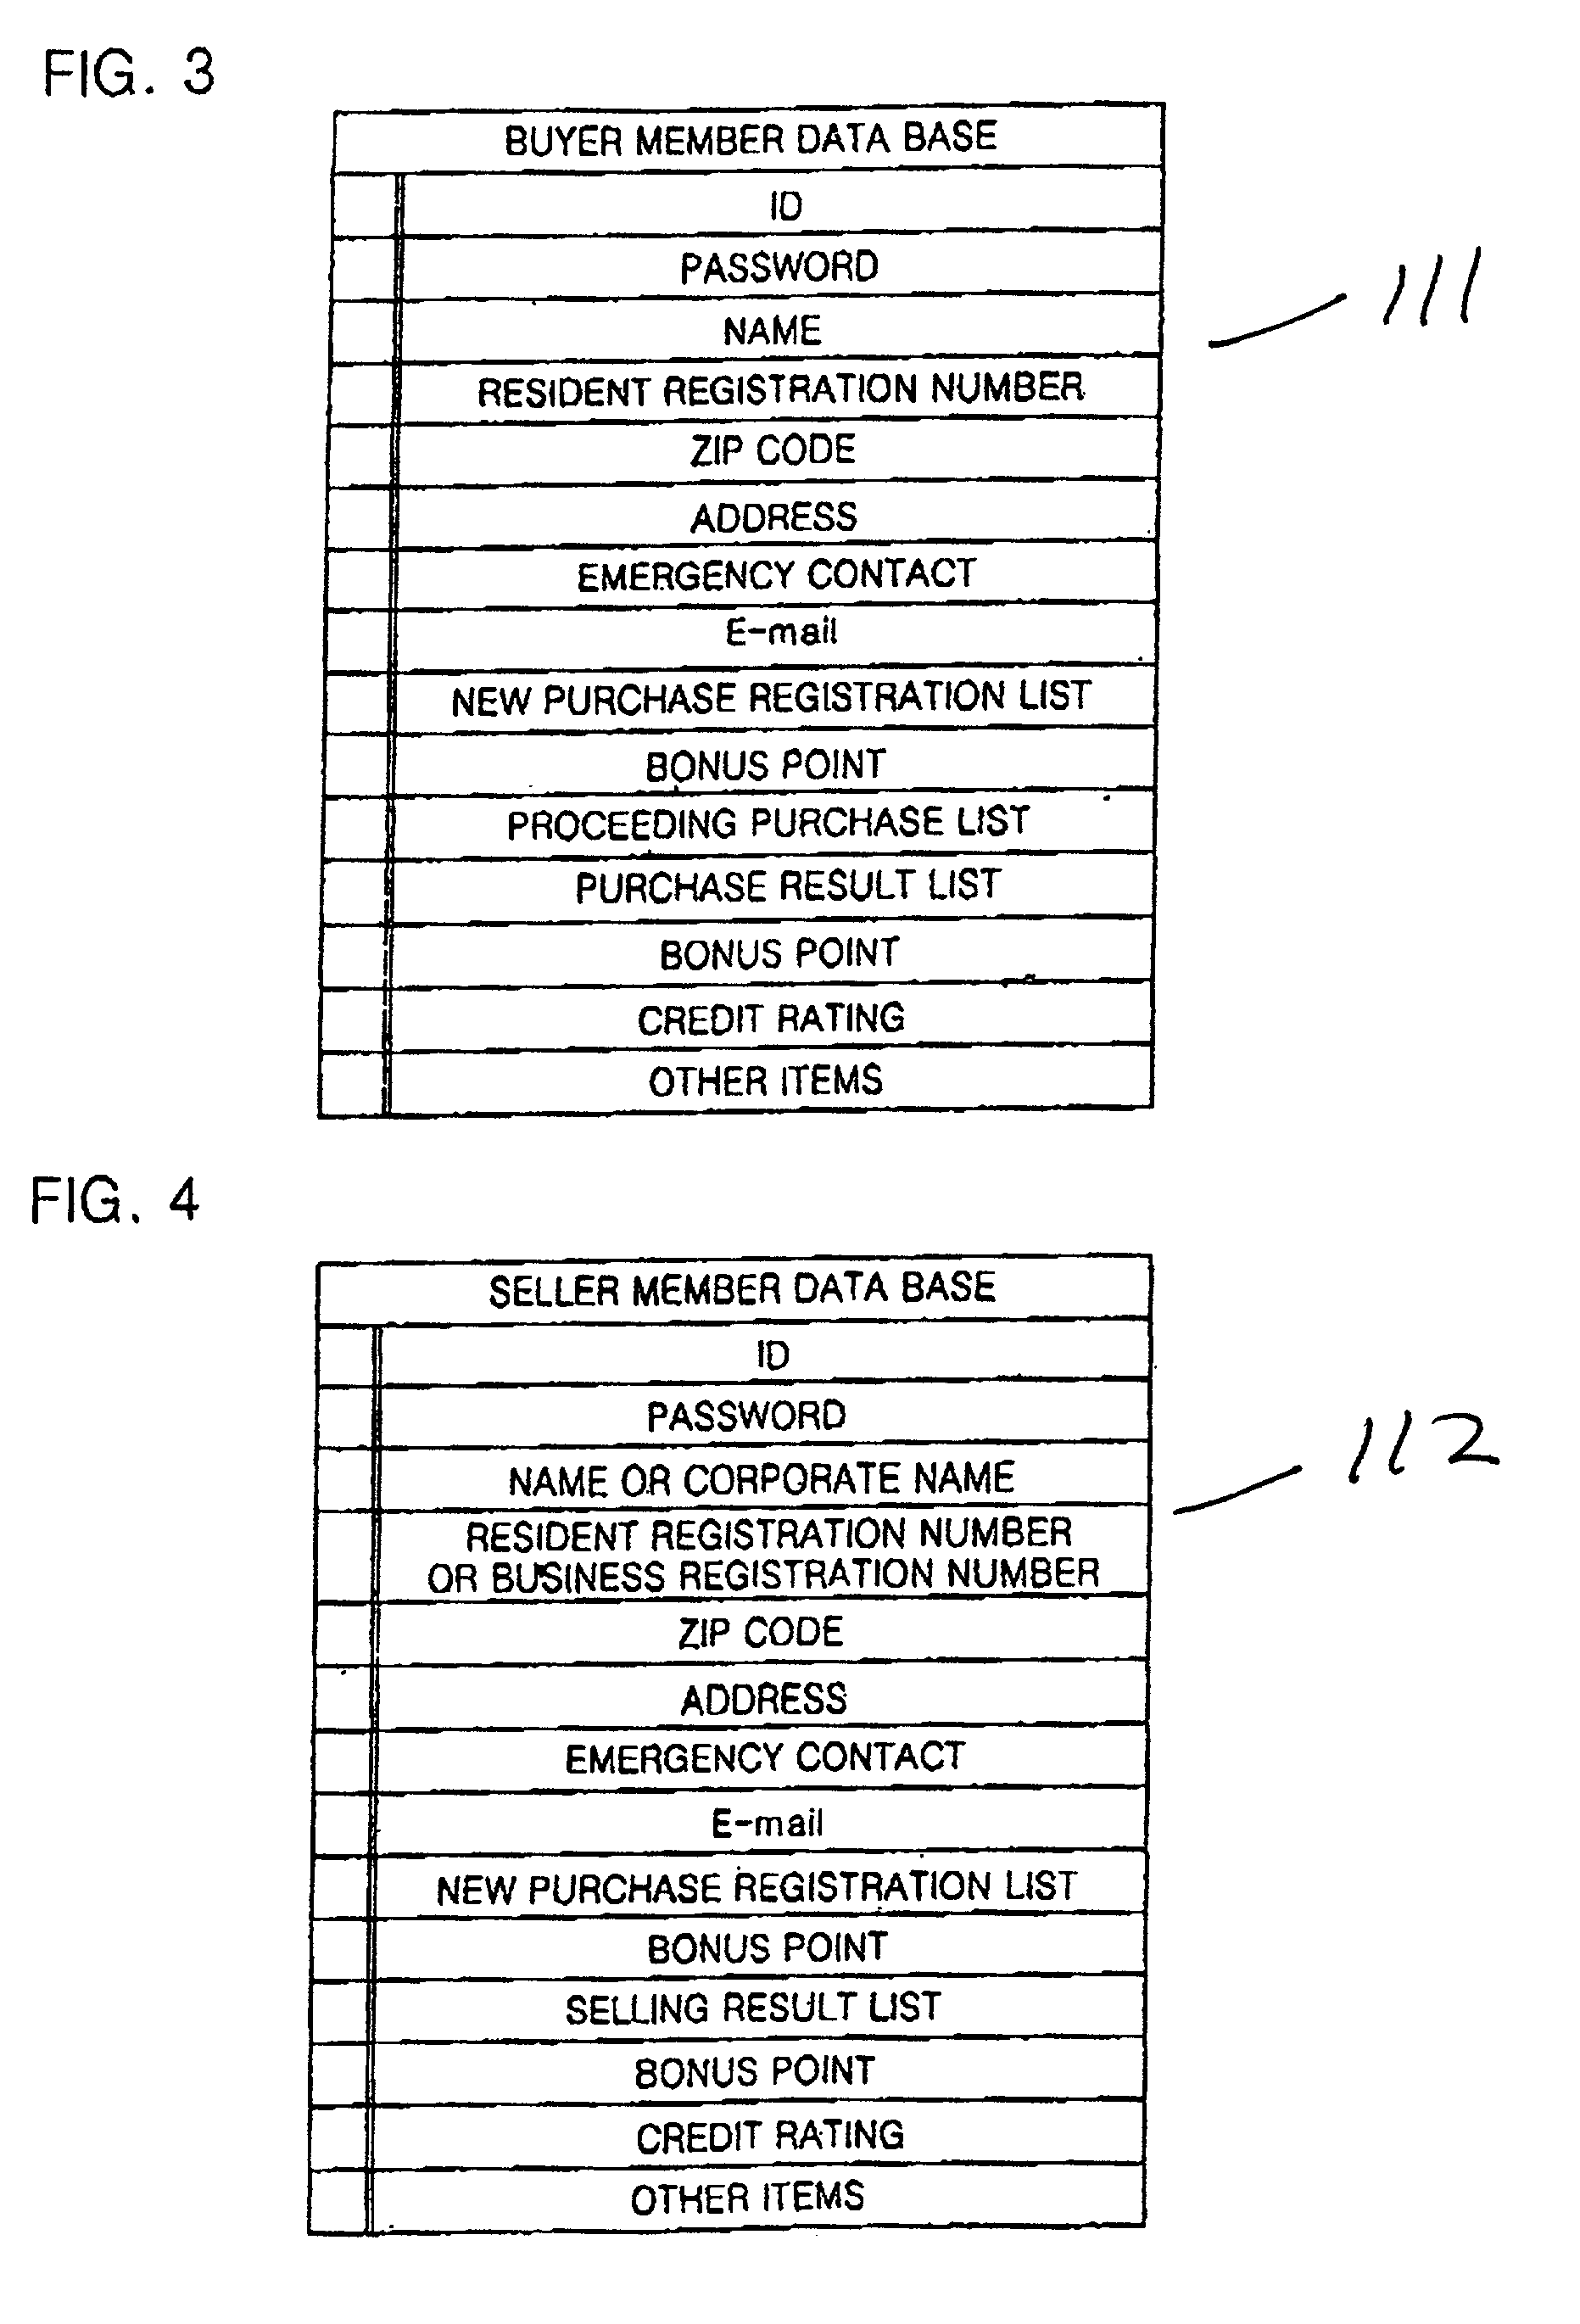 Method and apparatus for bi-directional auctioning between buyers and sellers using a computer network